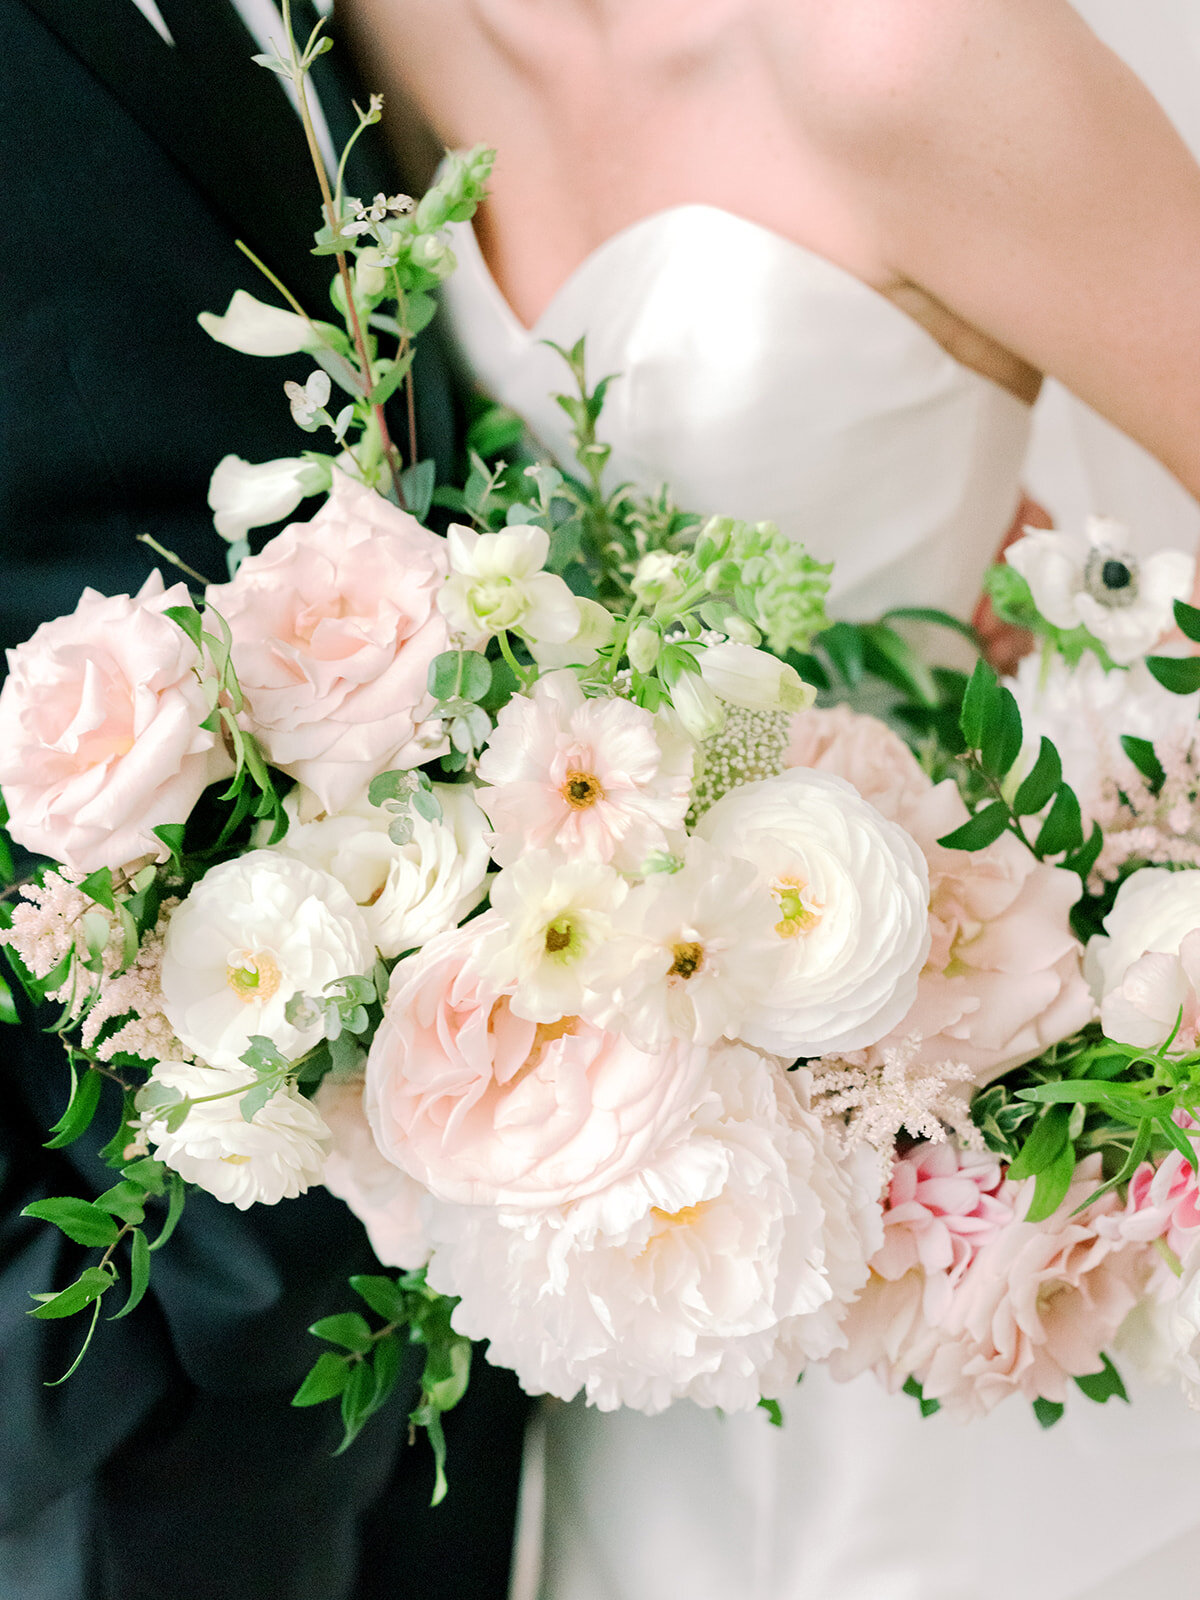 Garden-inspired bride’s bouquet with blush and white color palette including lots of lush, untamed greenery. Nashville wedding floral designer, Rosemary and Finch.